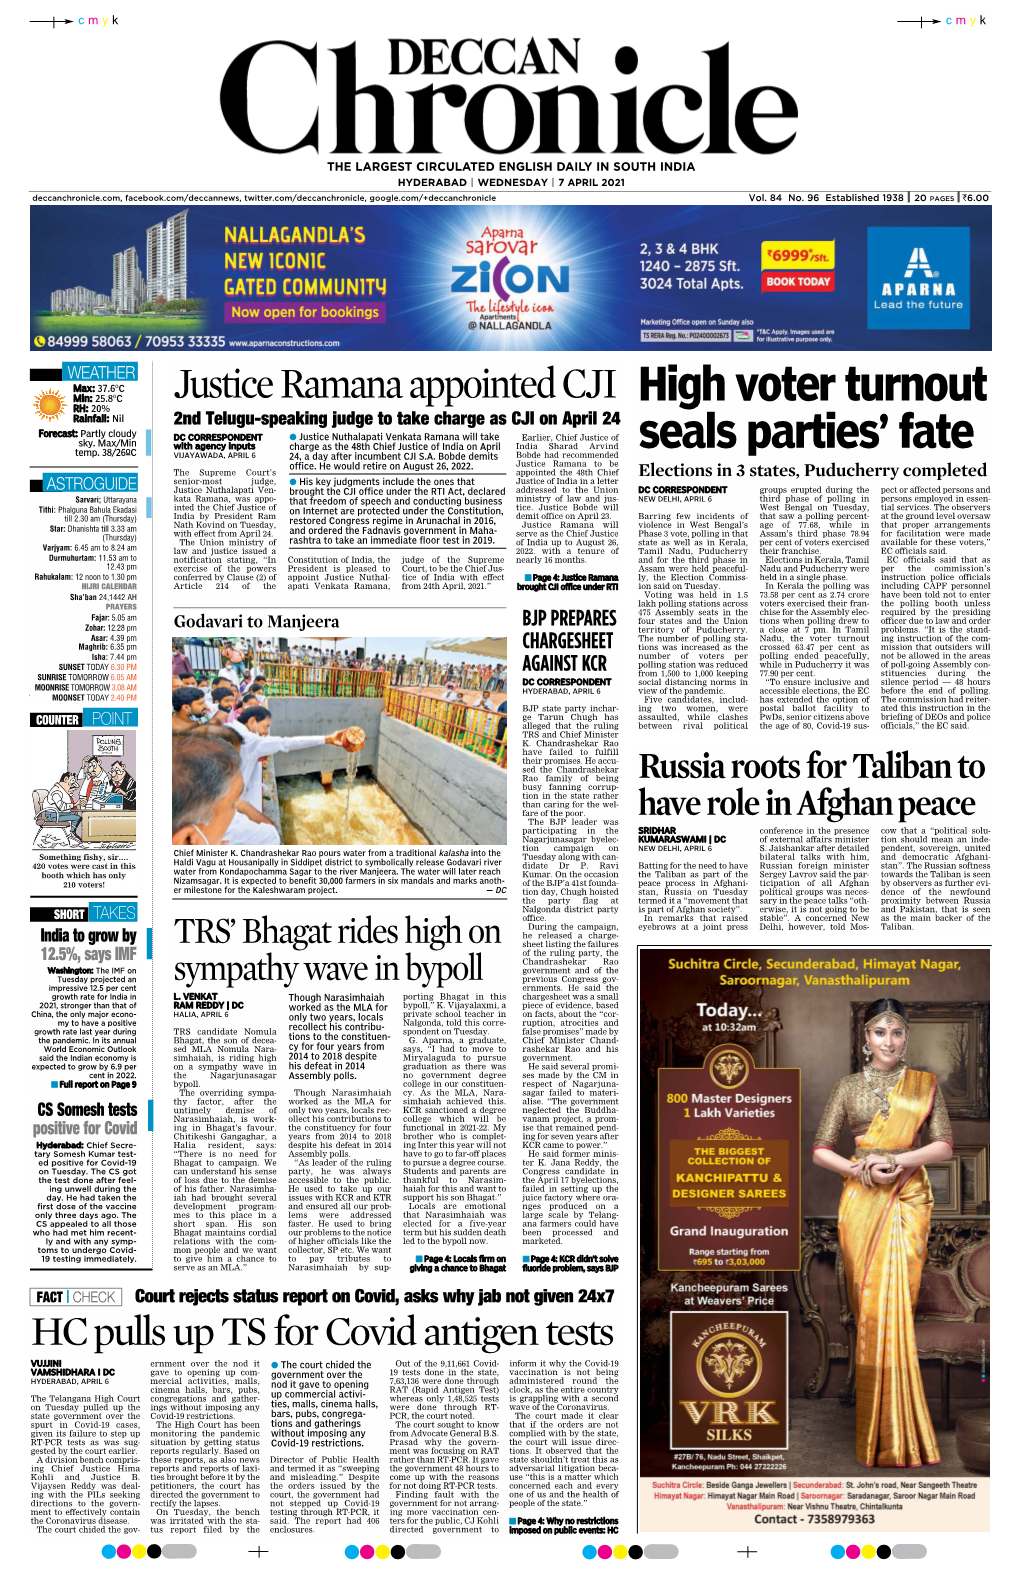 High Voter Turnout Seals Parties' Fate